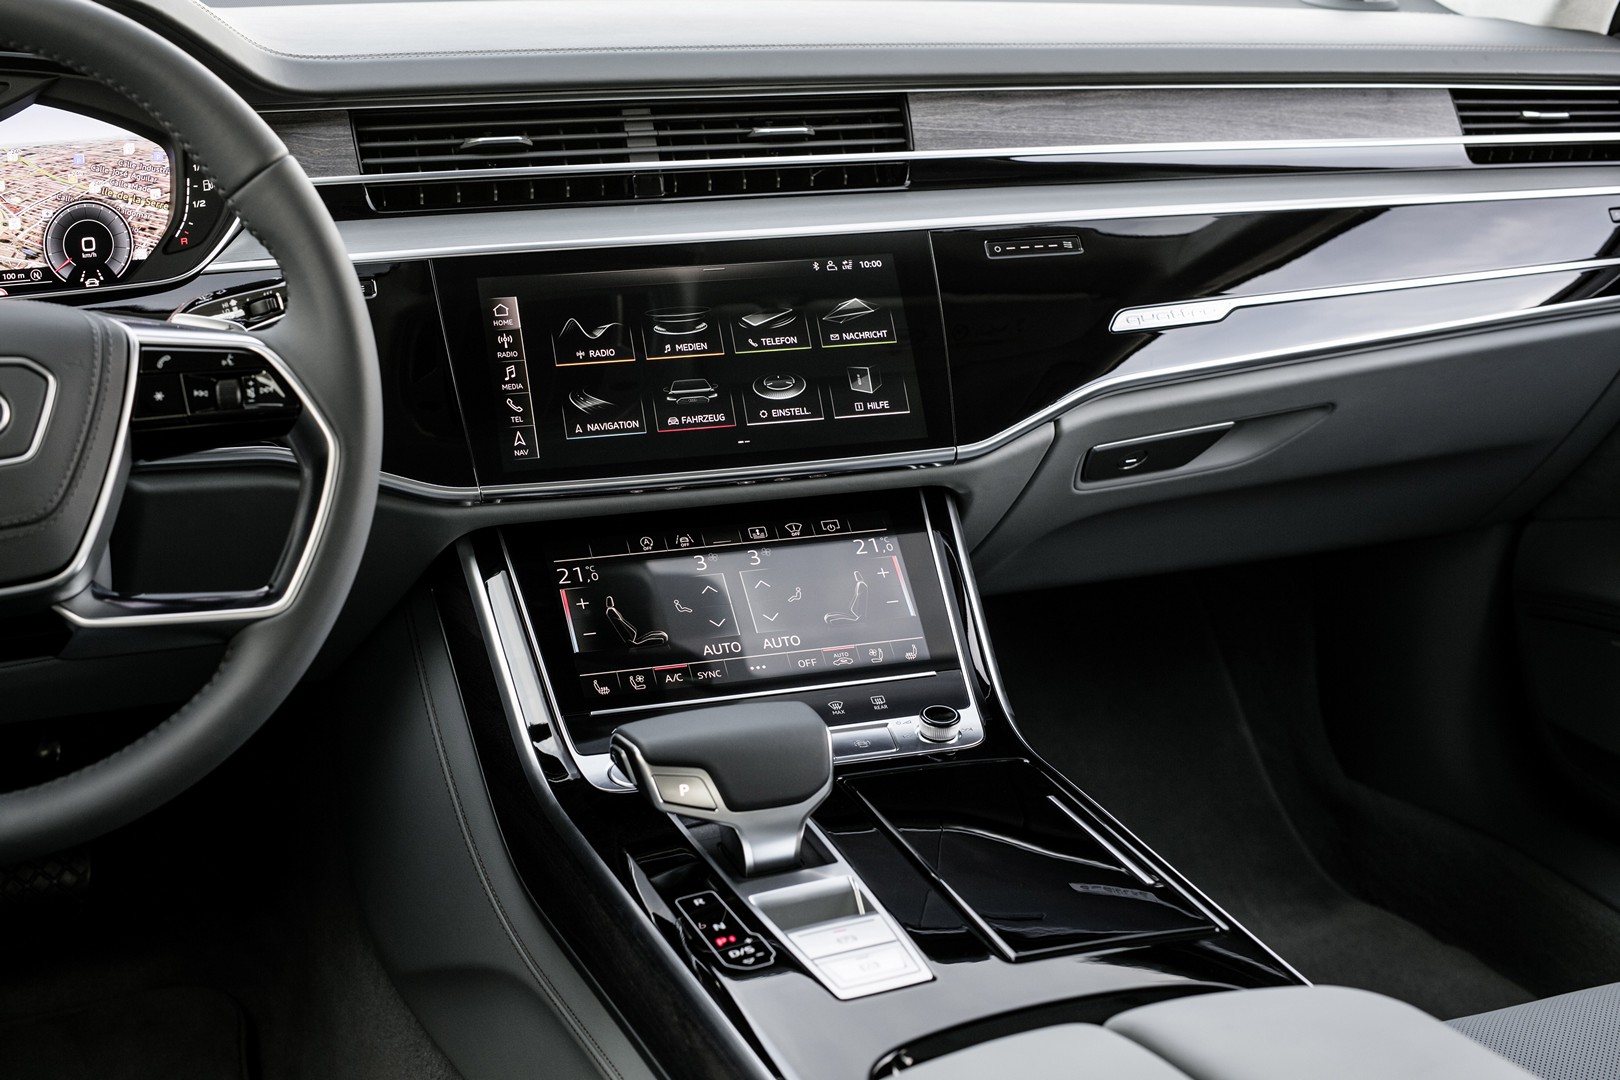 2019 Audi A8 to Debut Prologue Styling at LA Auto Show ...